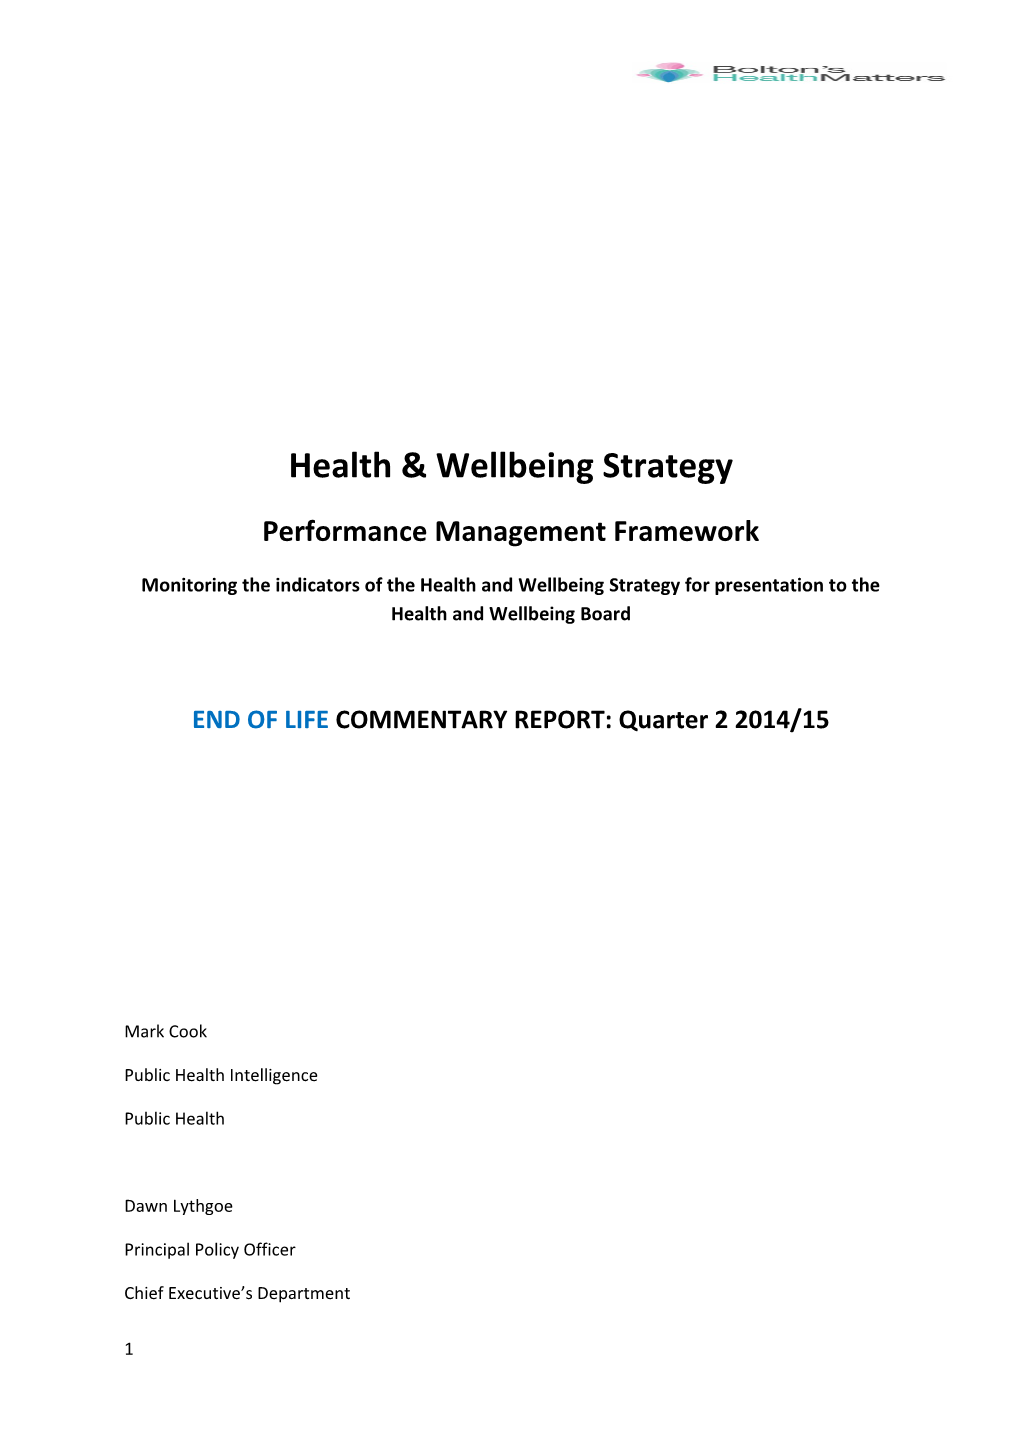 Health & Wellbeing Strategy